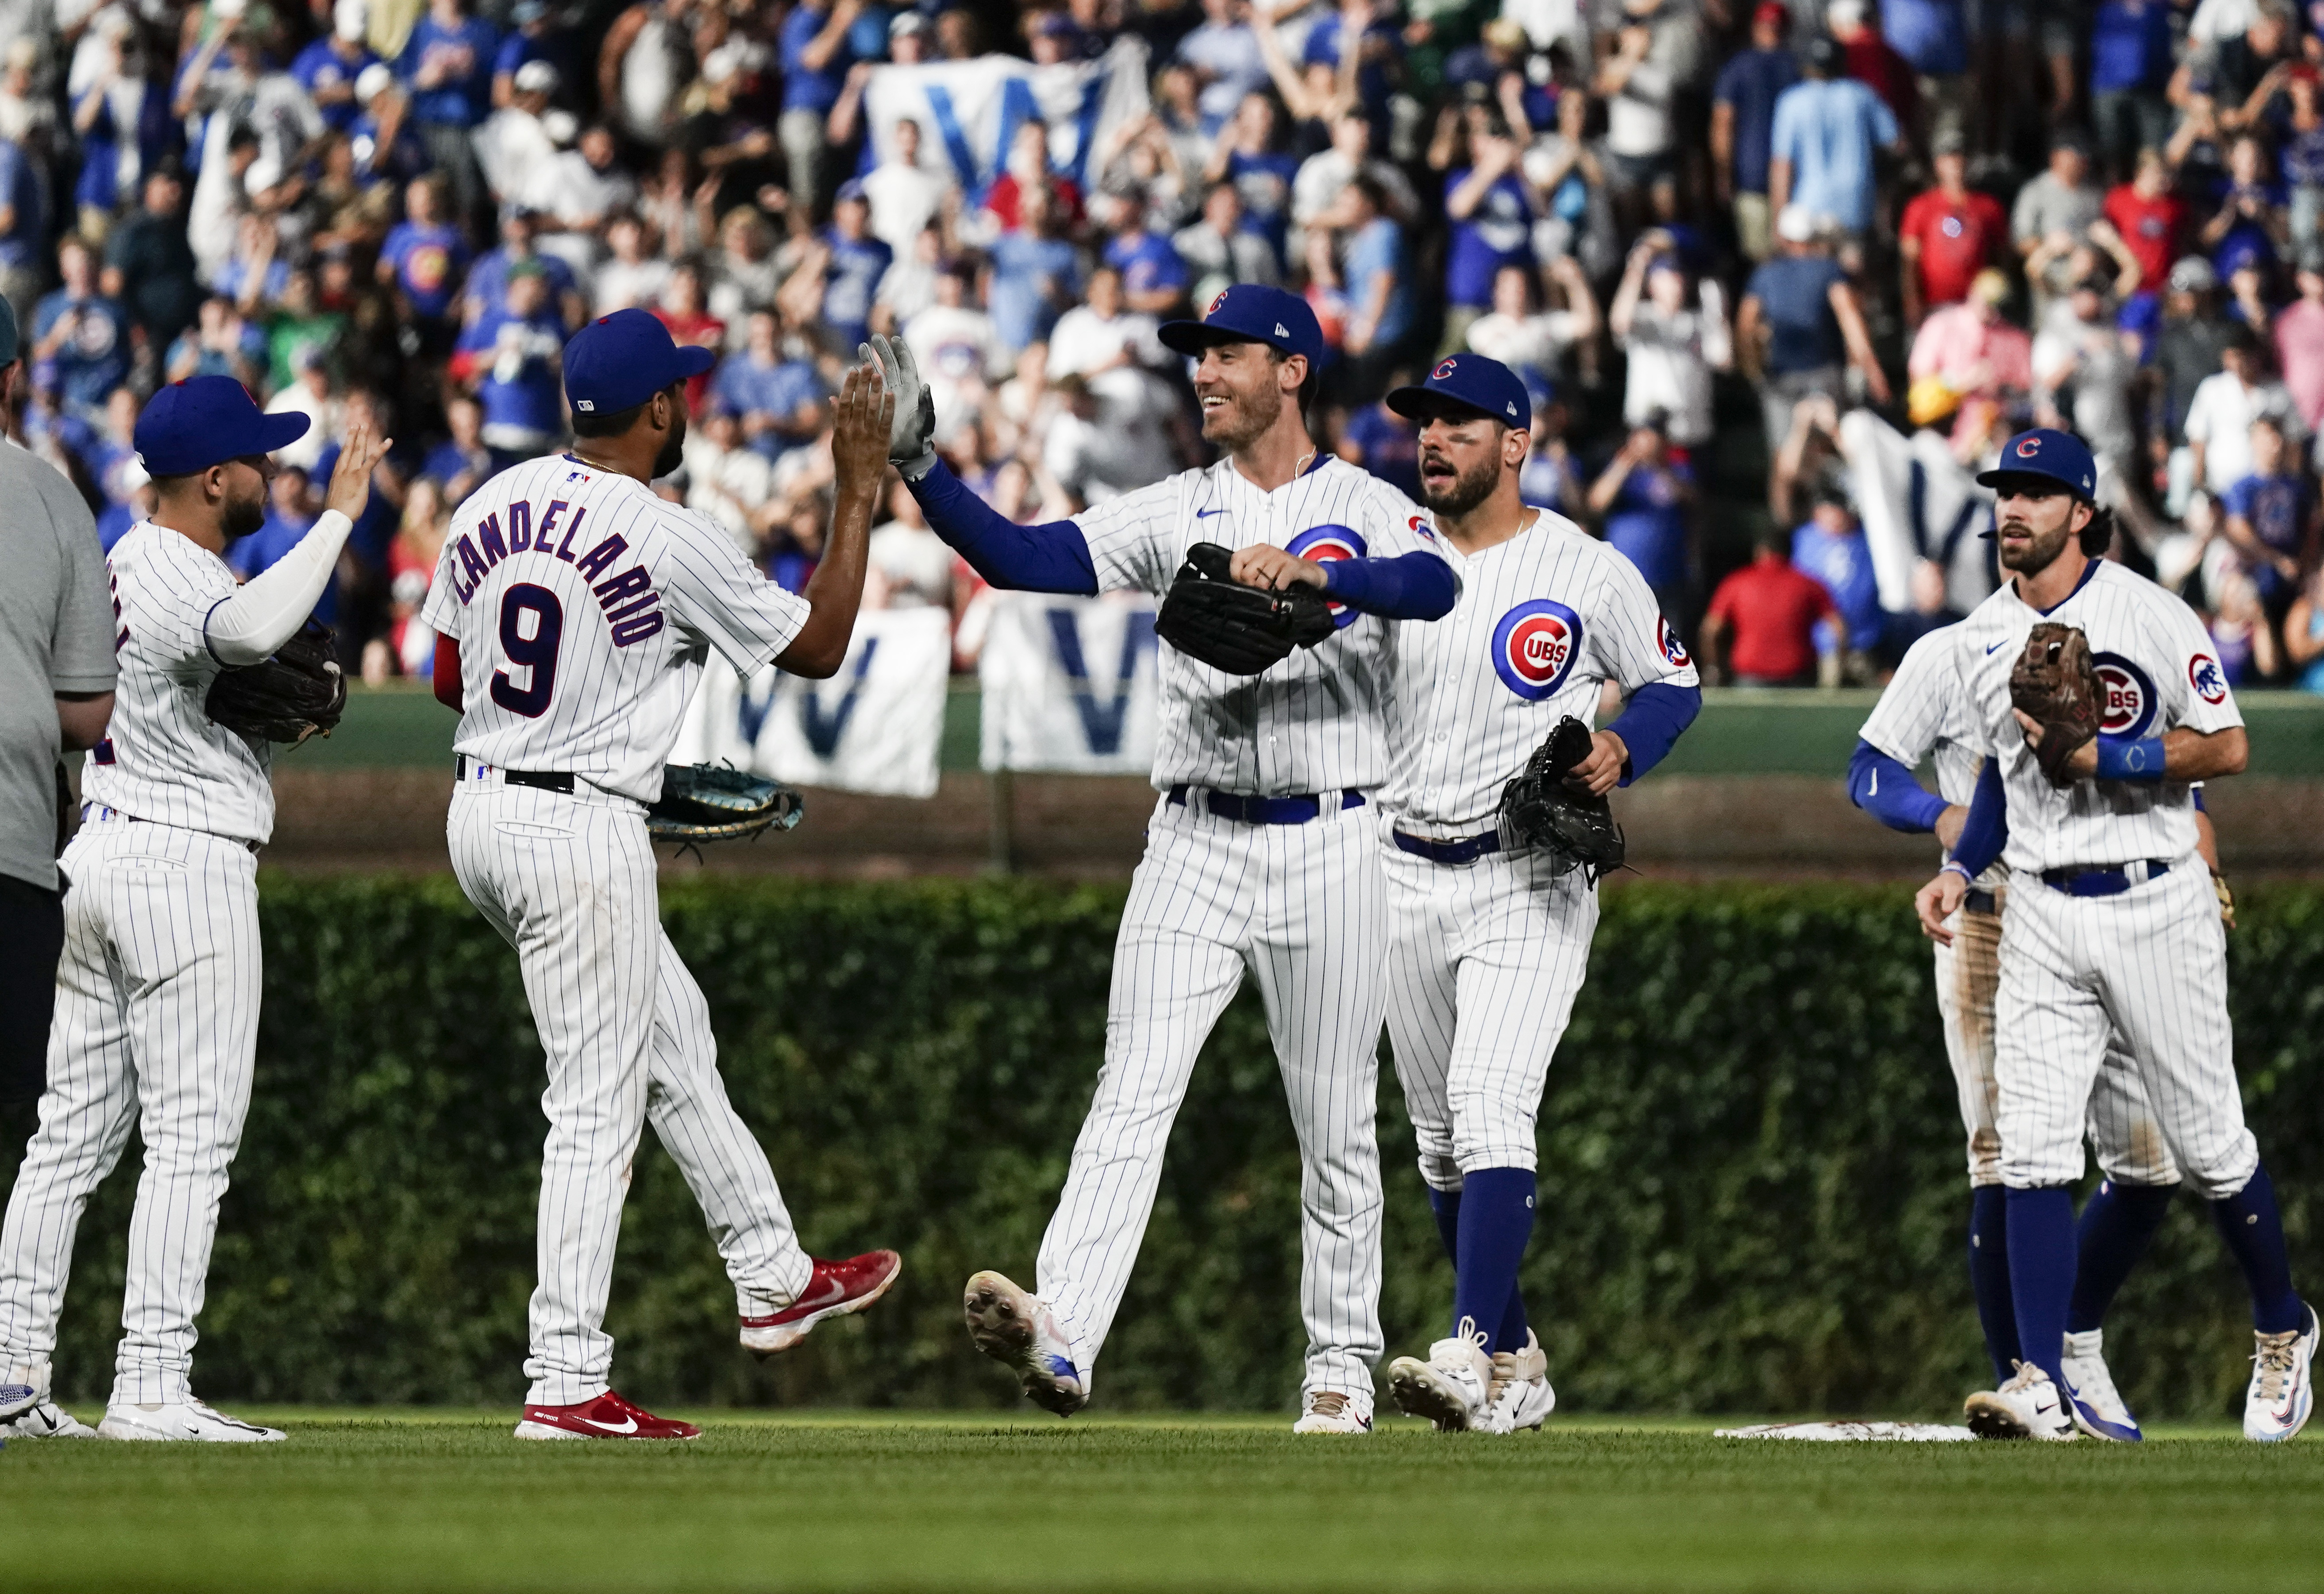 Only 1 member of the 2016 World Series champs remains on the Cubs